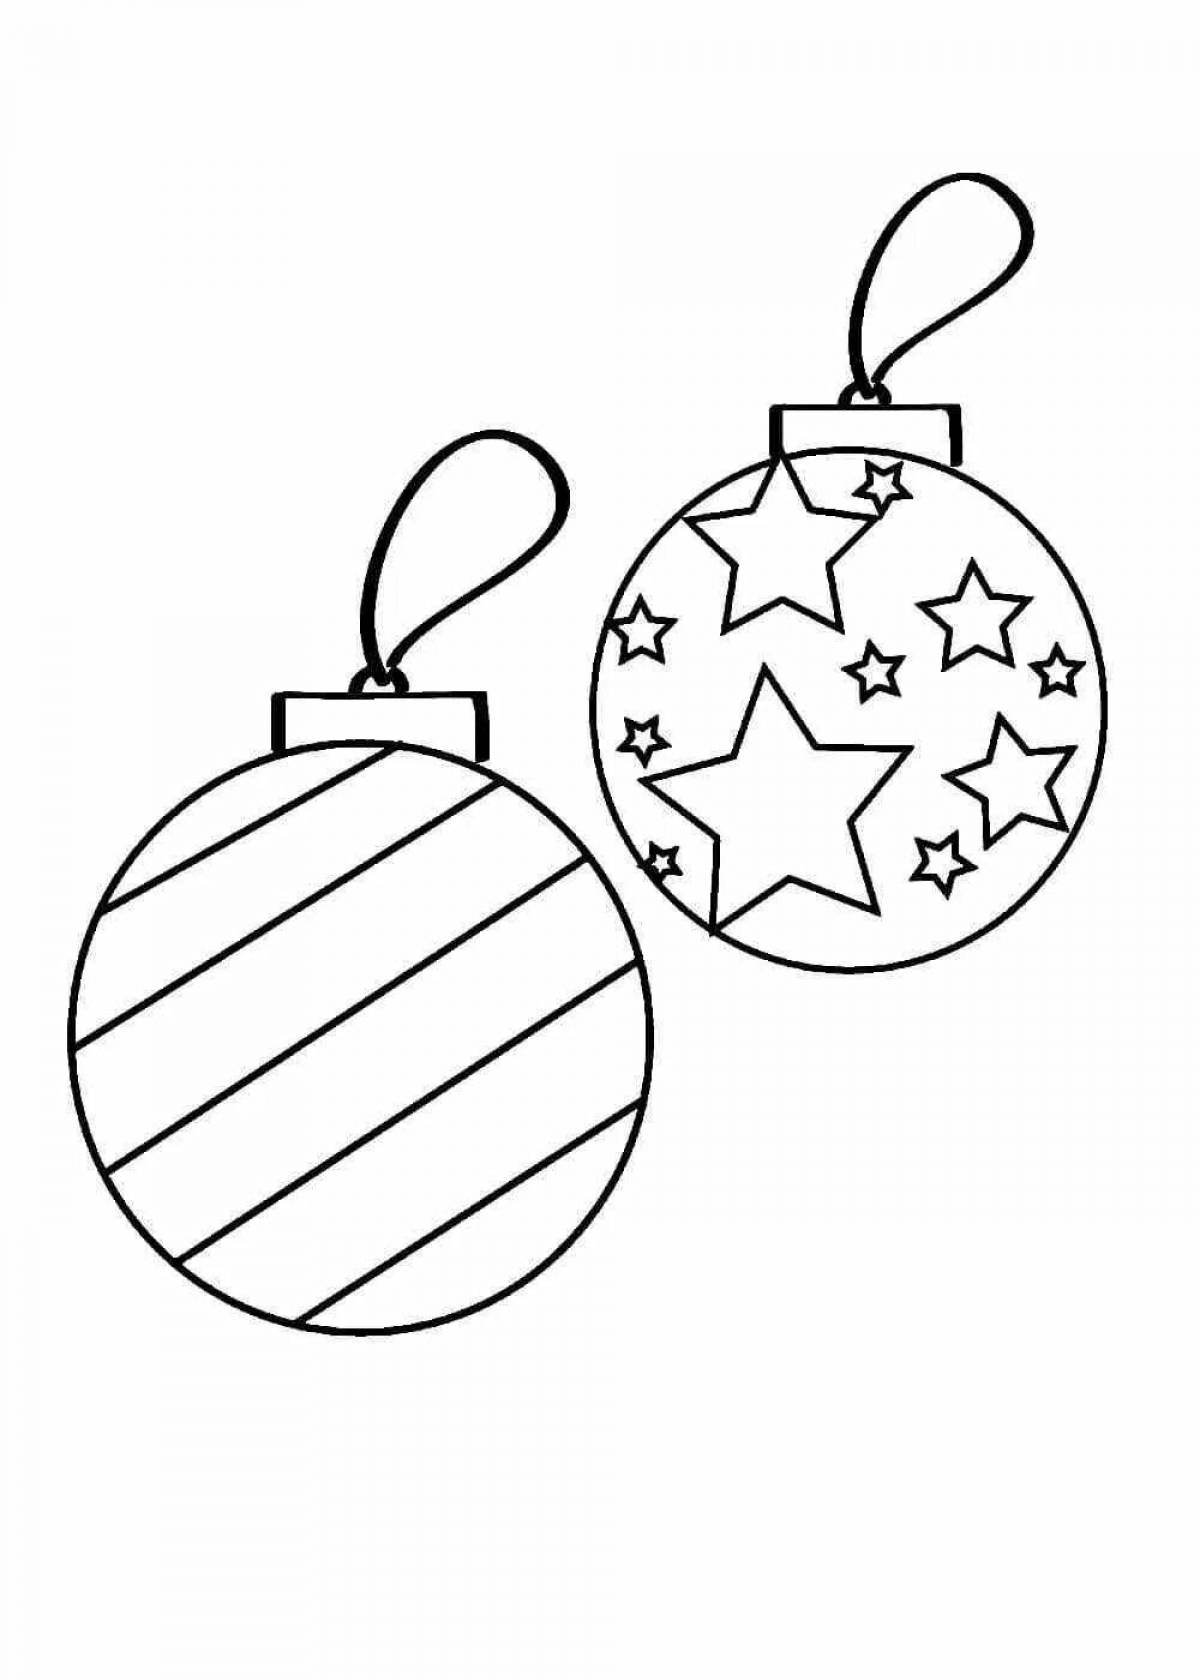 Colorful christmas ball coloring book for kids